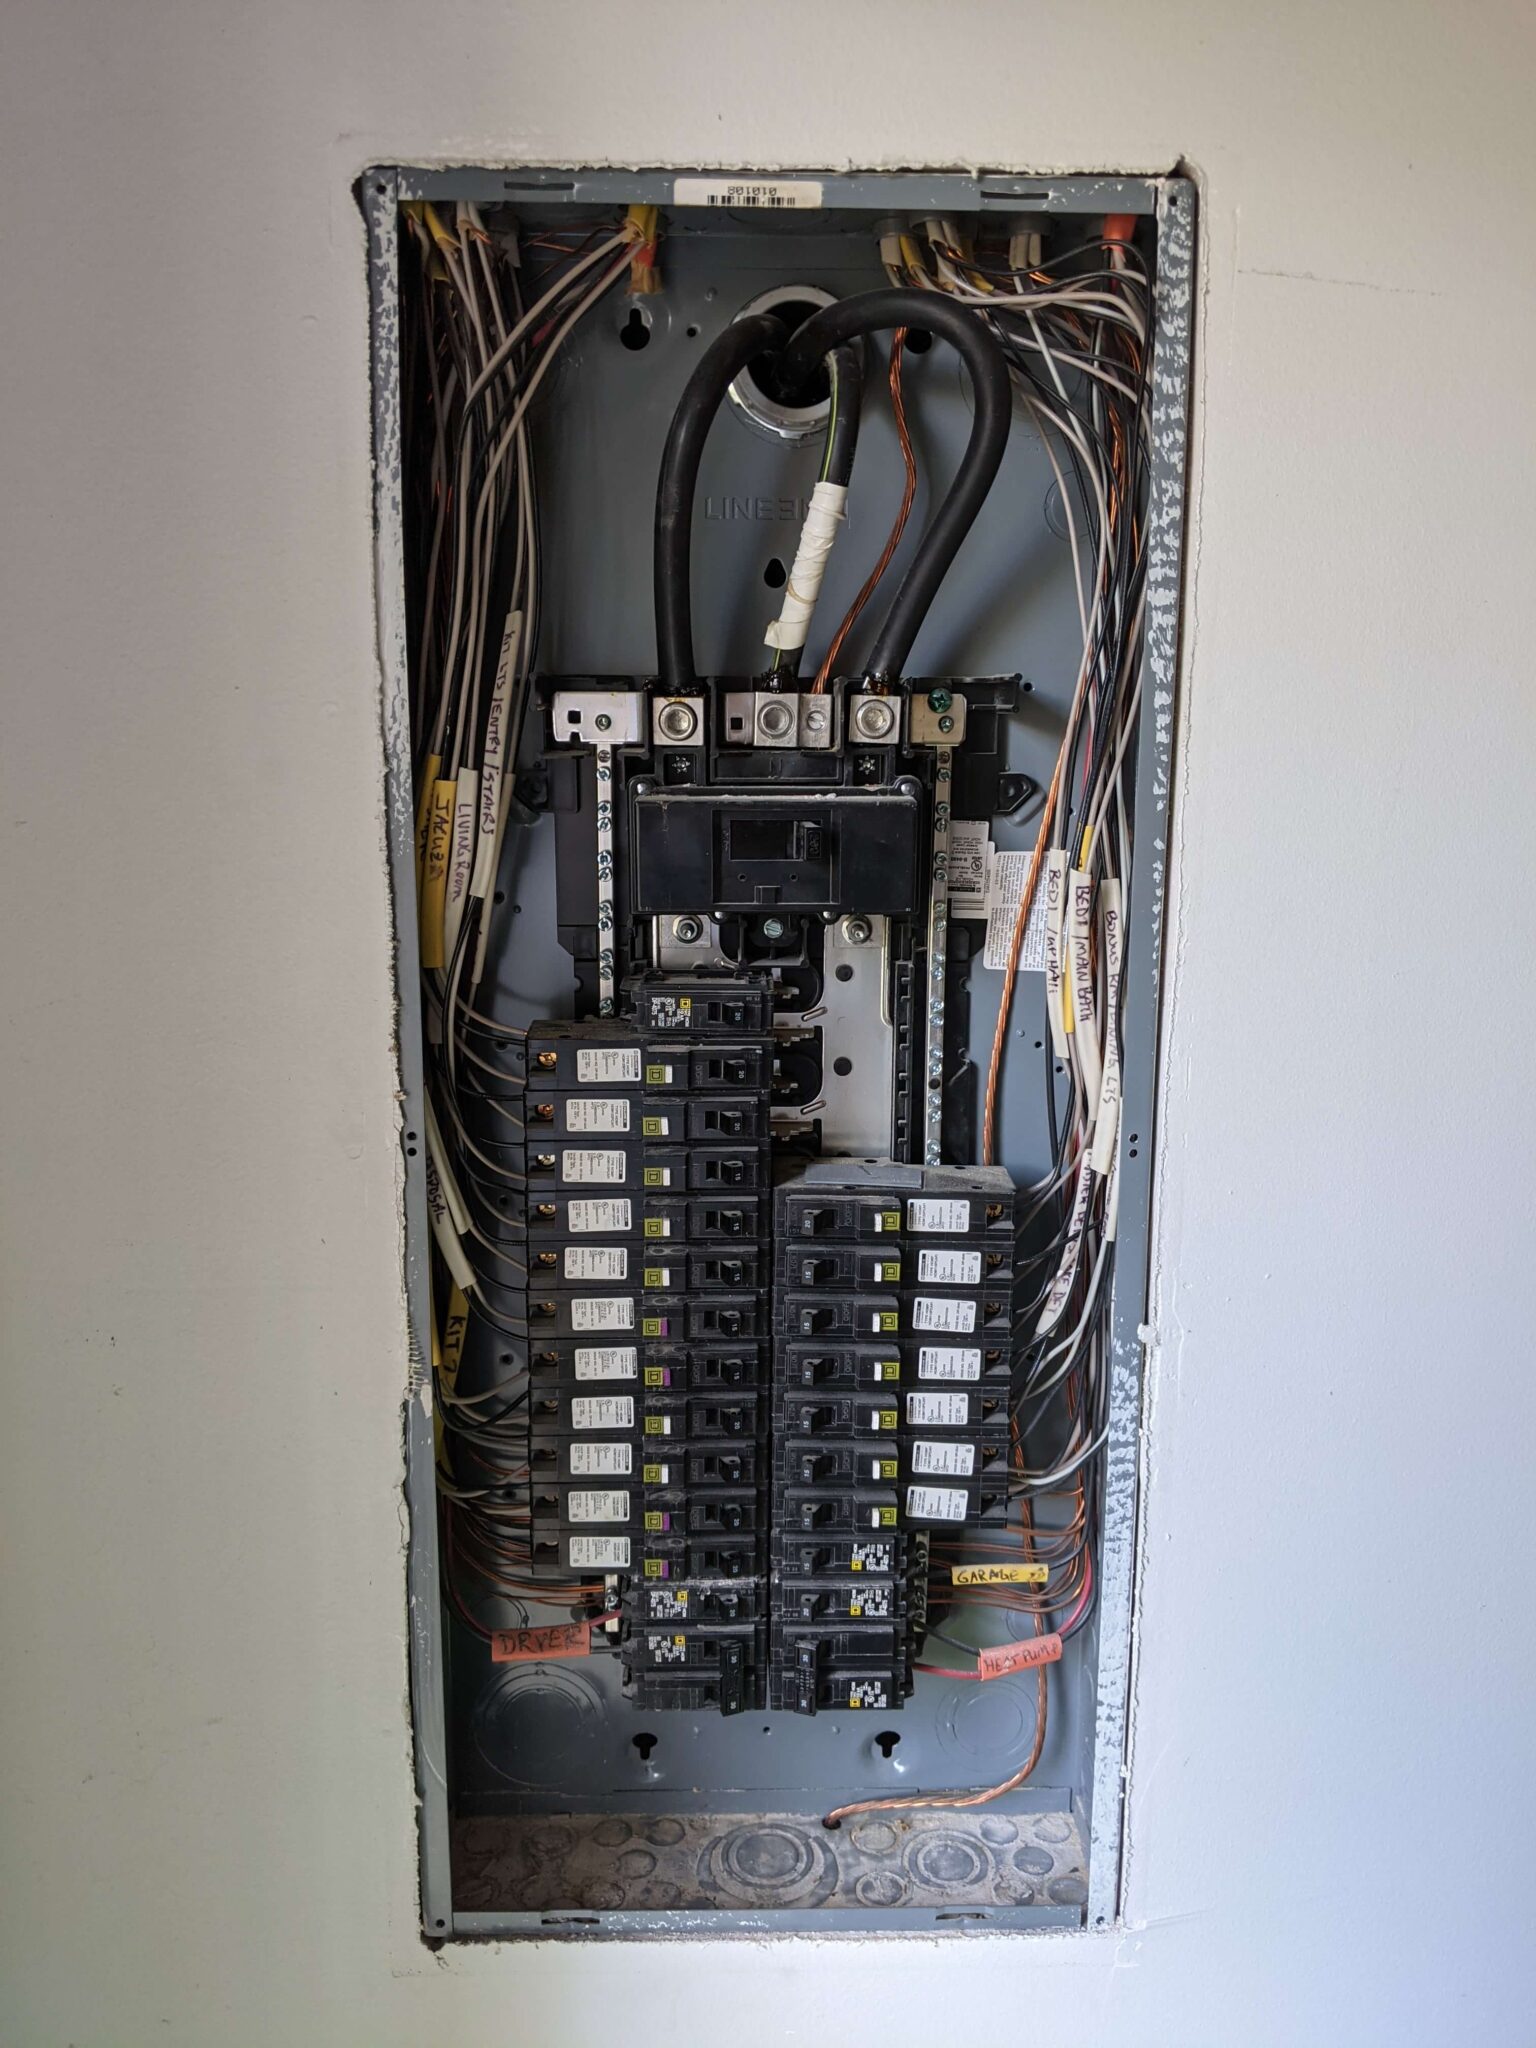 Breakers and electrical panel shown with the cover off in Washington